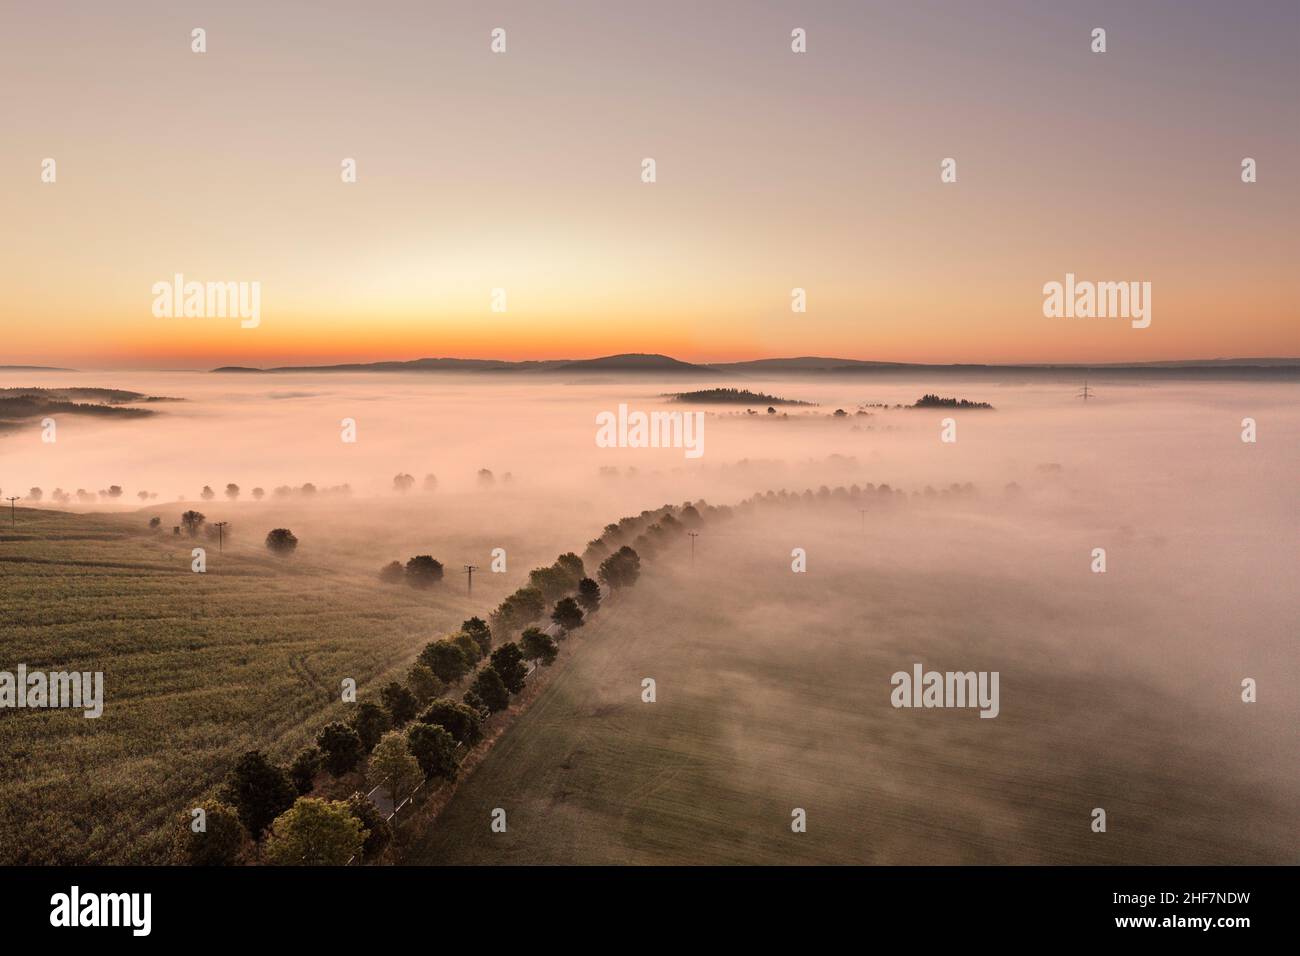 Germany,  Thuringia,  Großbreitenbach,  Böhlen,  an avenue and isolated hills and mountains protrude from a sea of fog,  dawn,  overview,  aerial view Stock Photo